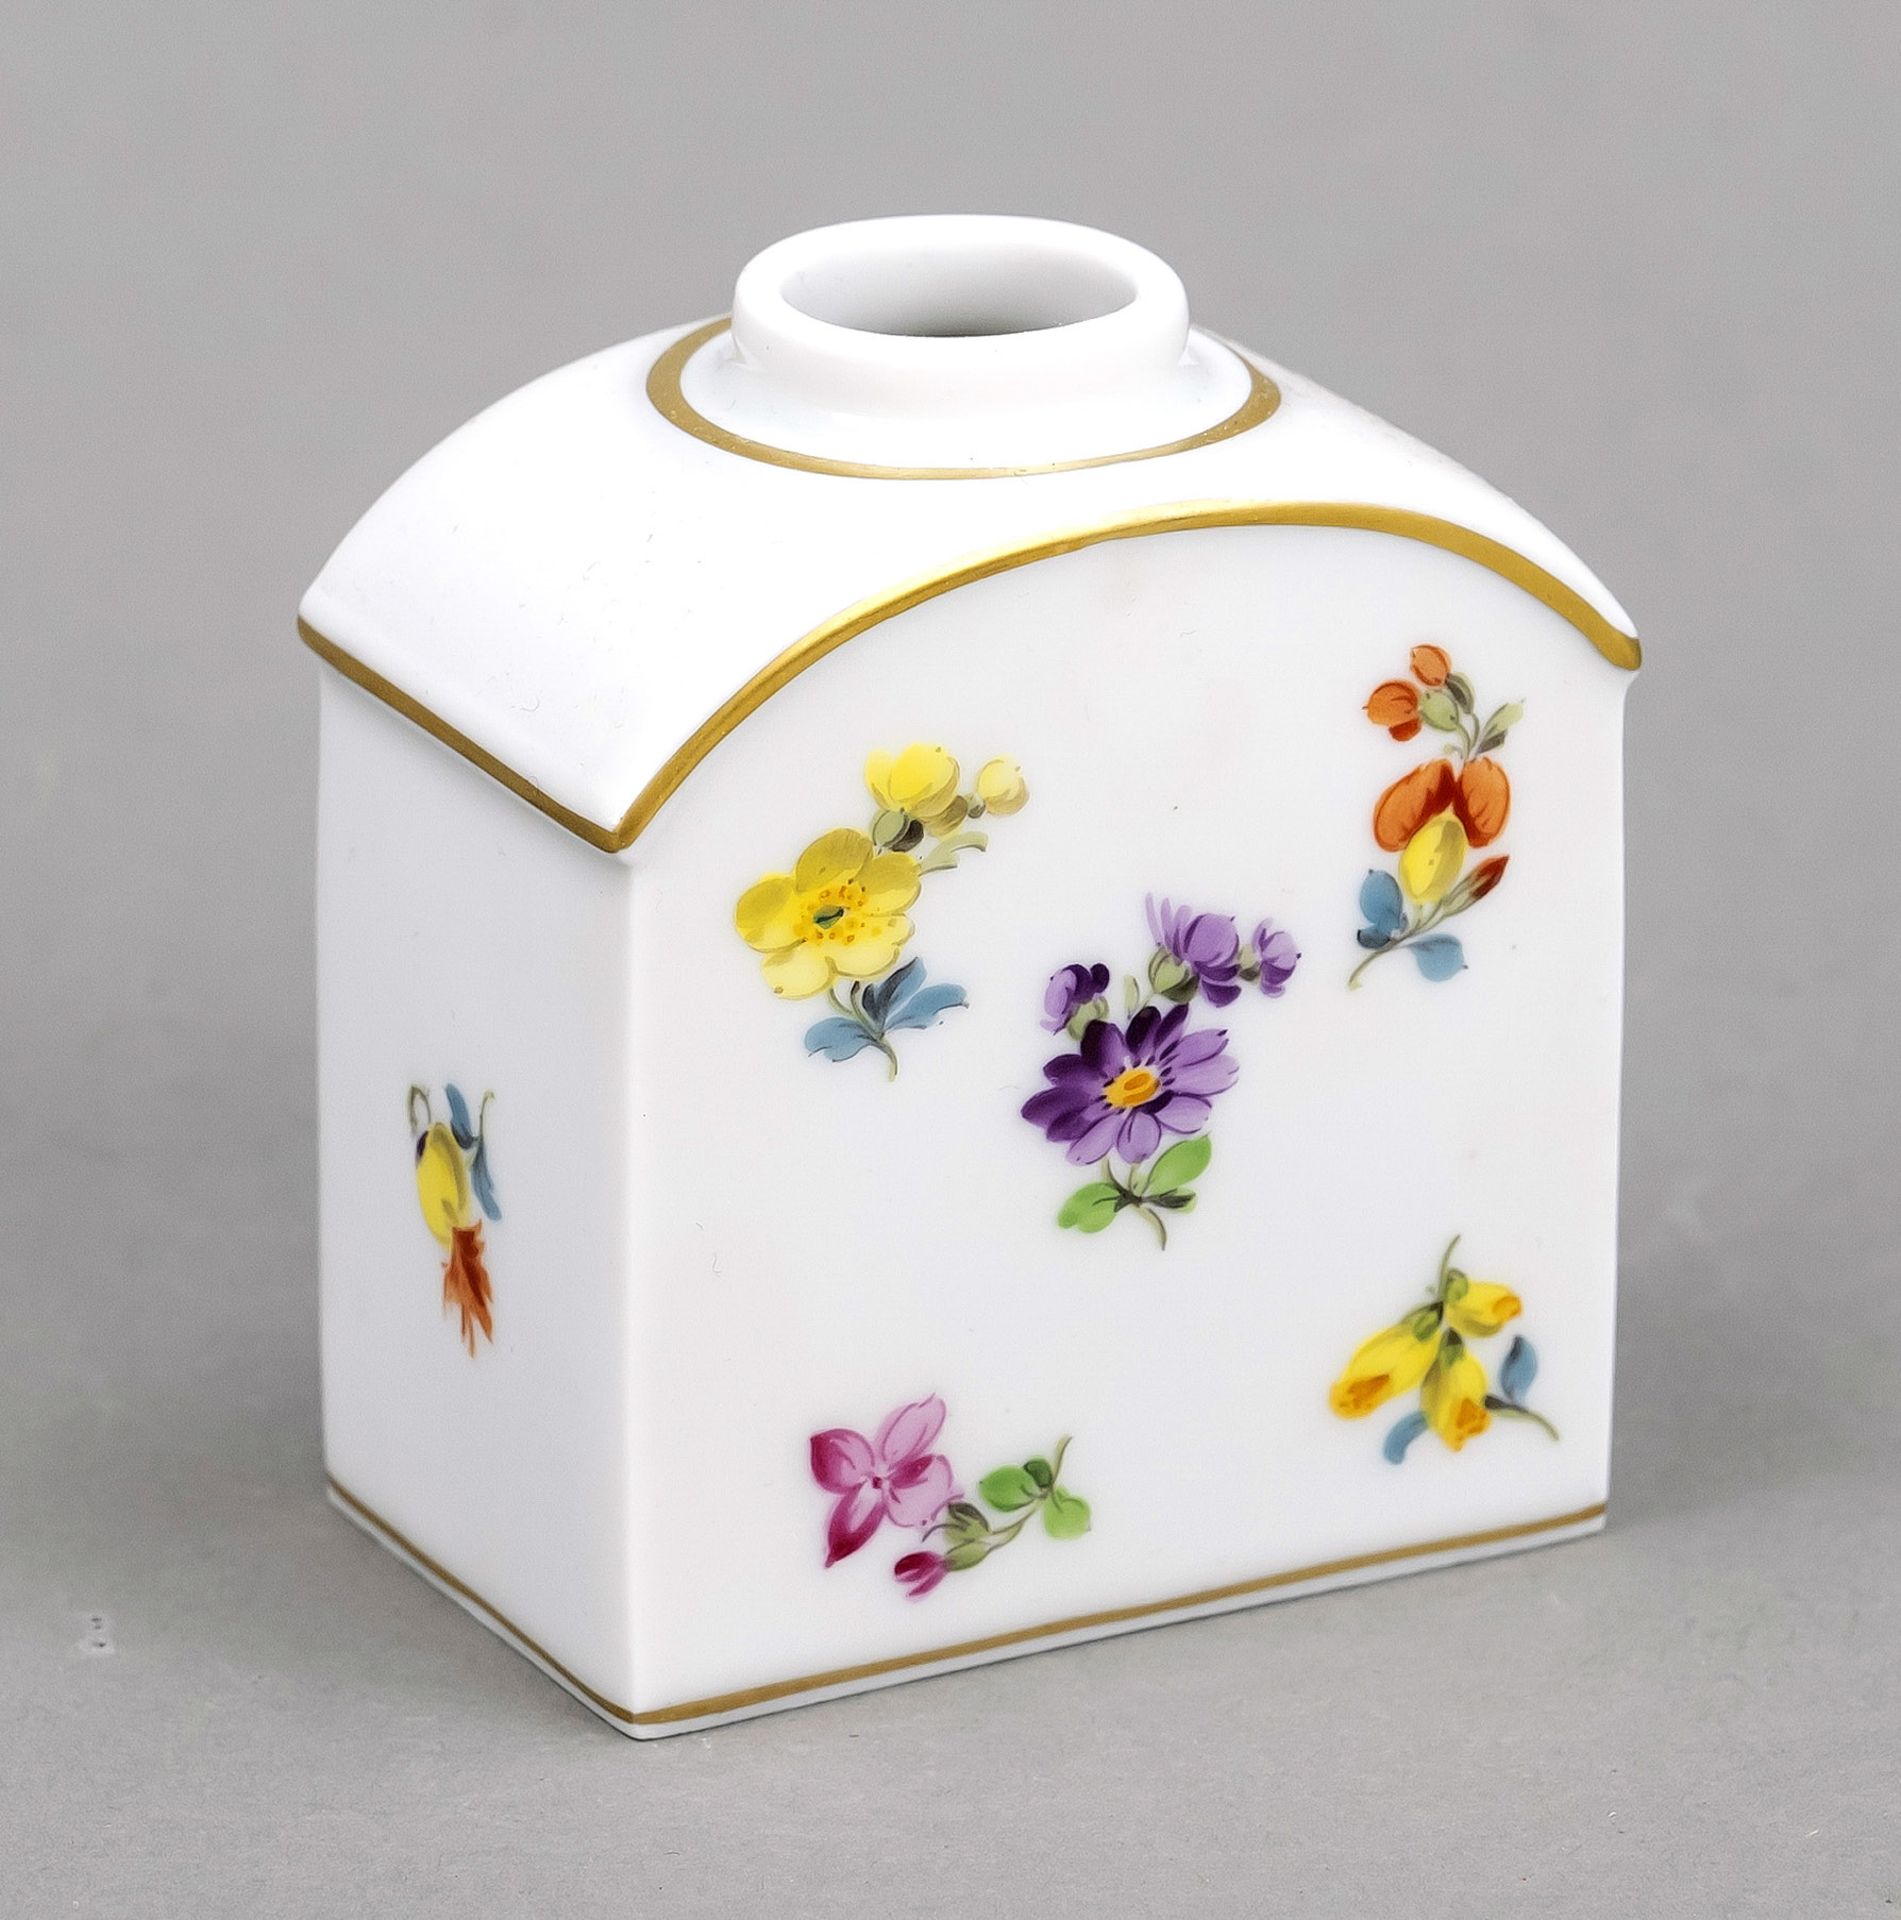 Small tea caddy, Meissen, c. 1980, 2nd century, curved shoulder, missing lid, polychrome painting